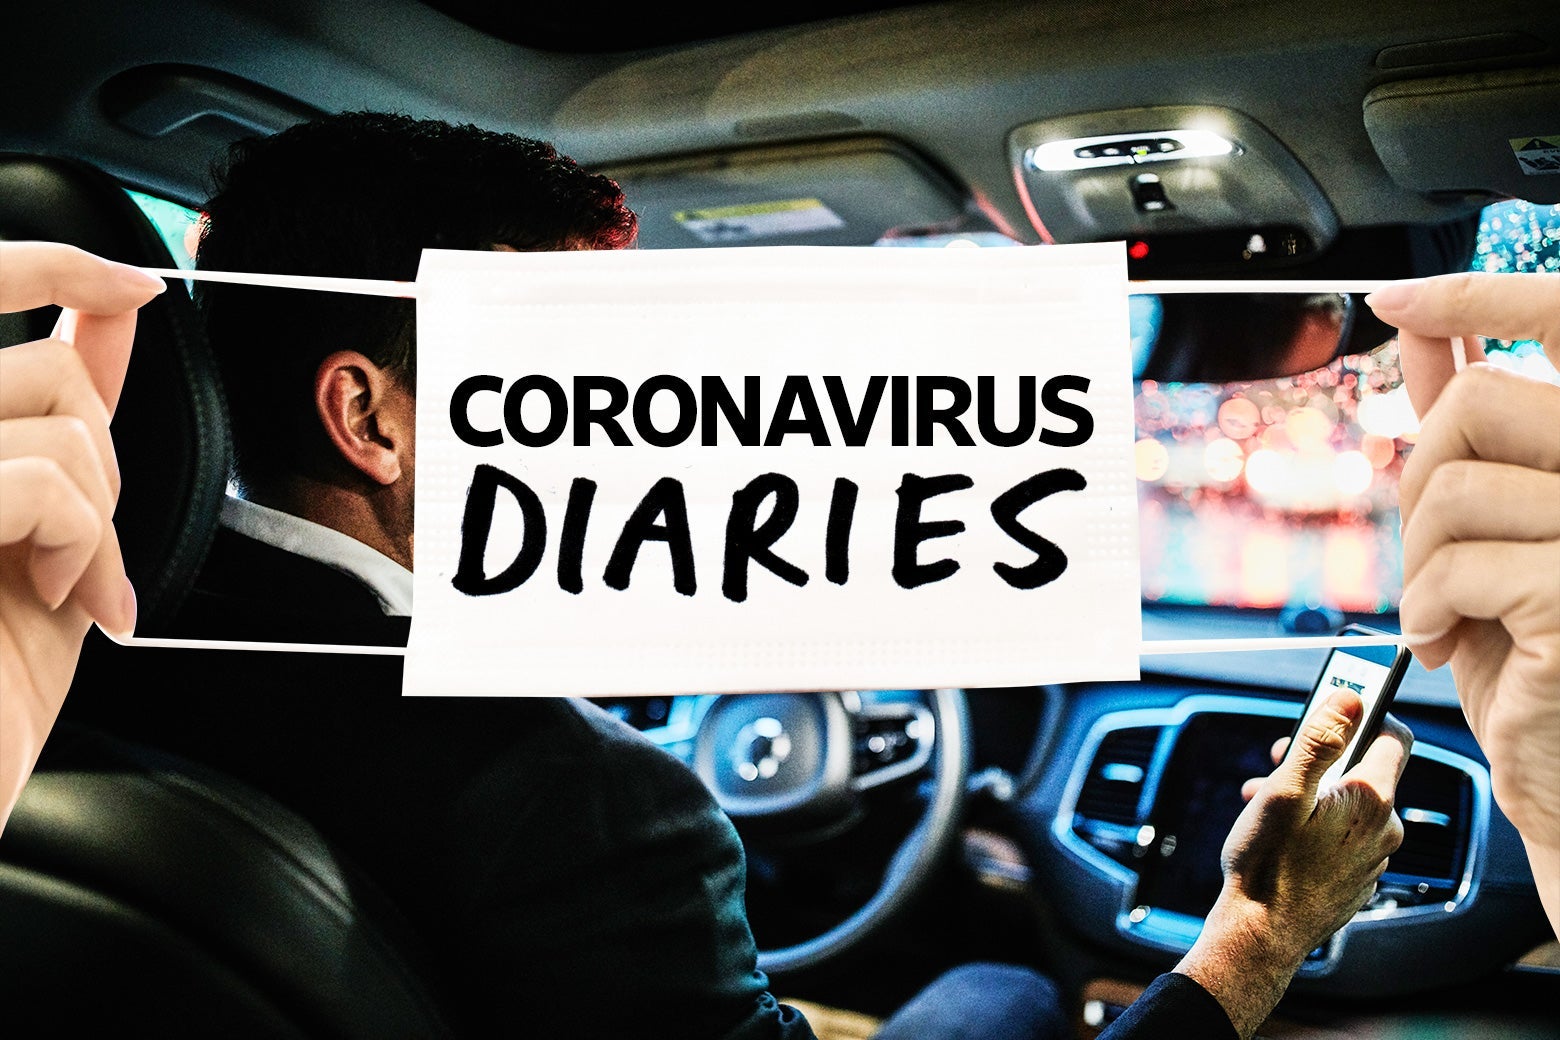 A driver looking at his phone in a car, overlaid with a mask that says "Coronavirus Diaries."